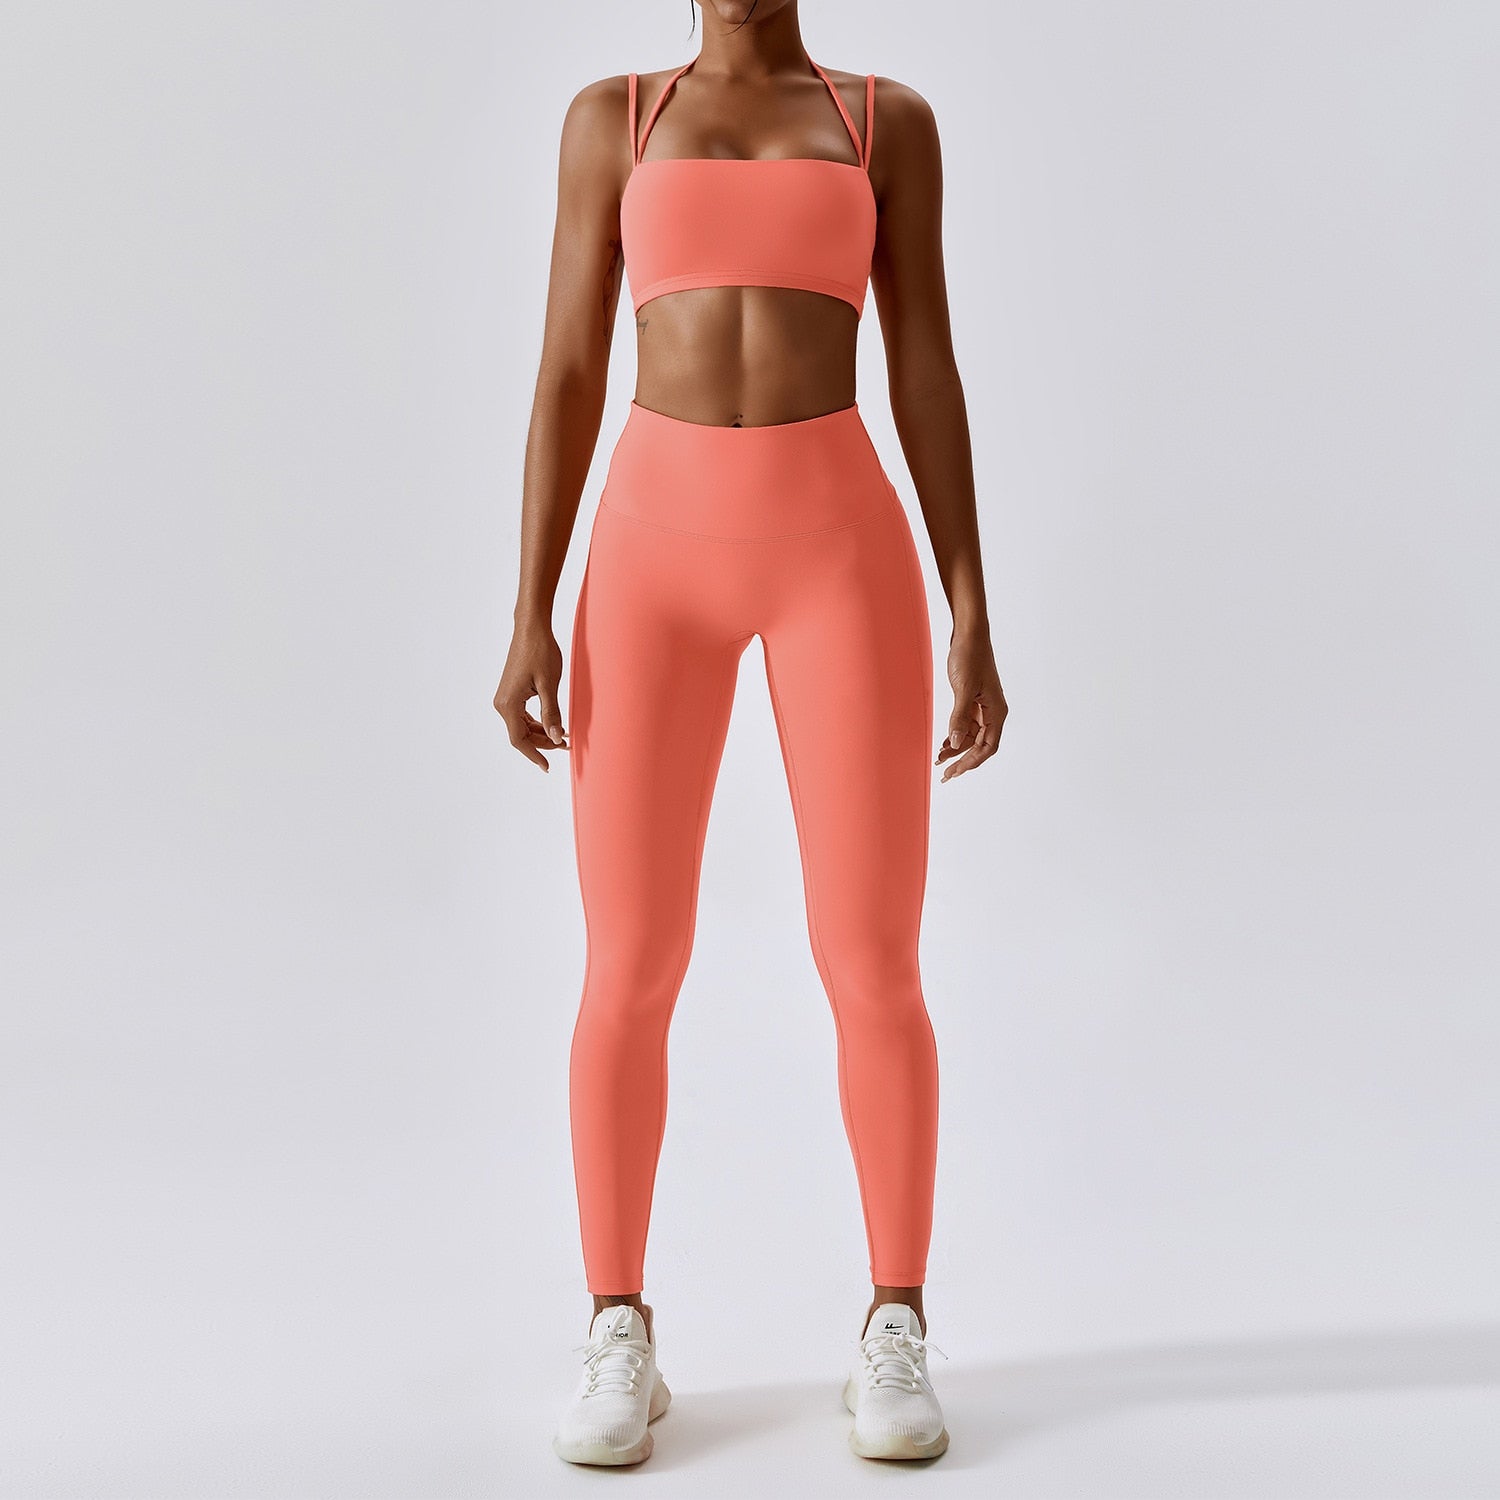 Yoga Clothing Sets Athletic Wear Women High Waist Leggings And Top Two Piece Set Seamless Gym Tracksuit Fitness Workout Outfits - Bonnie Lassio